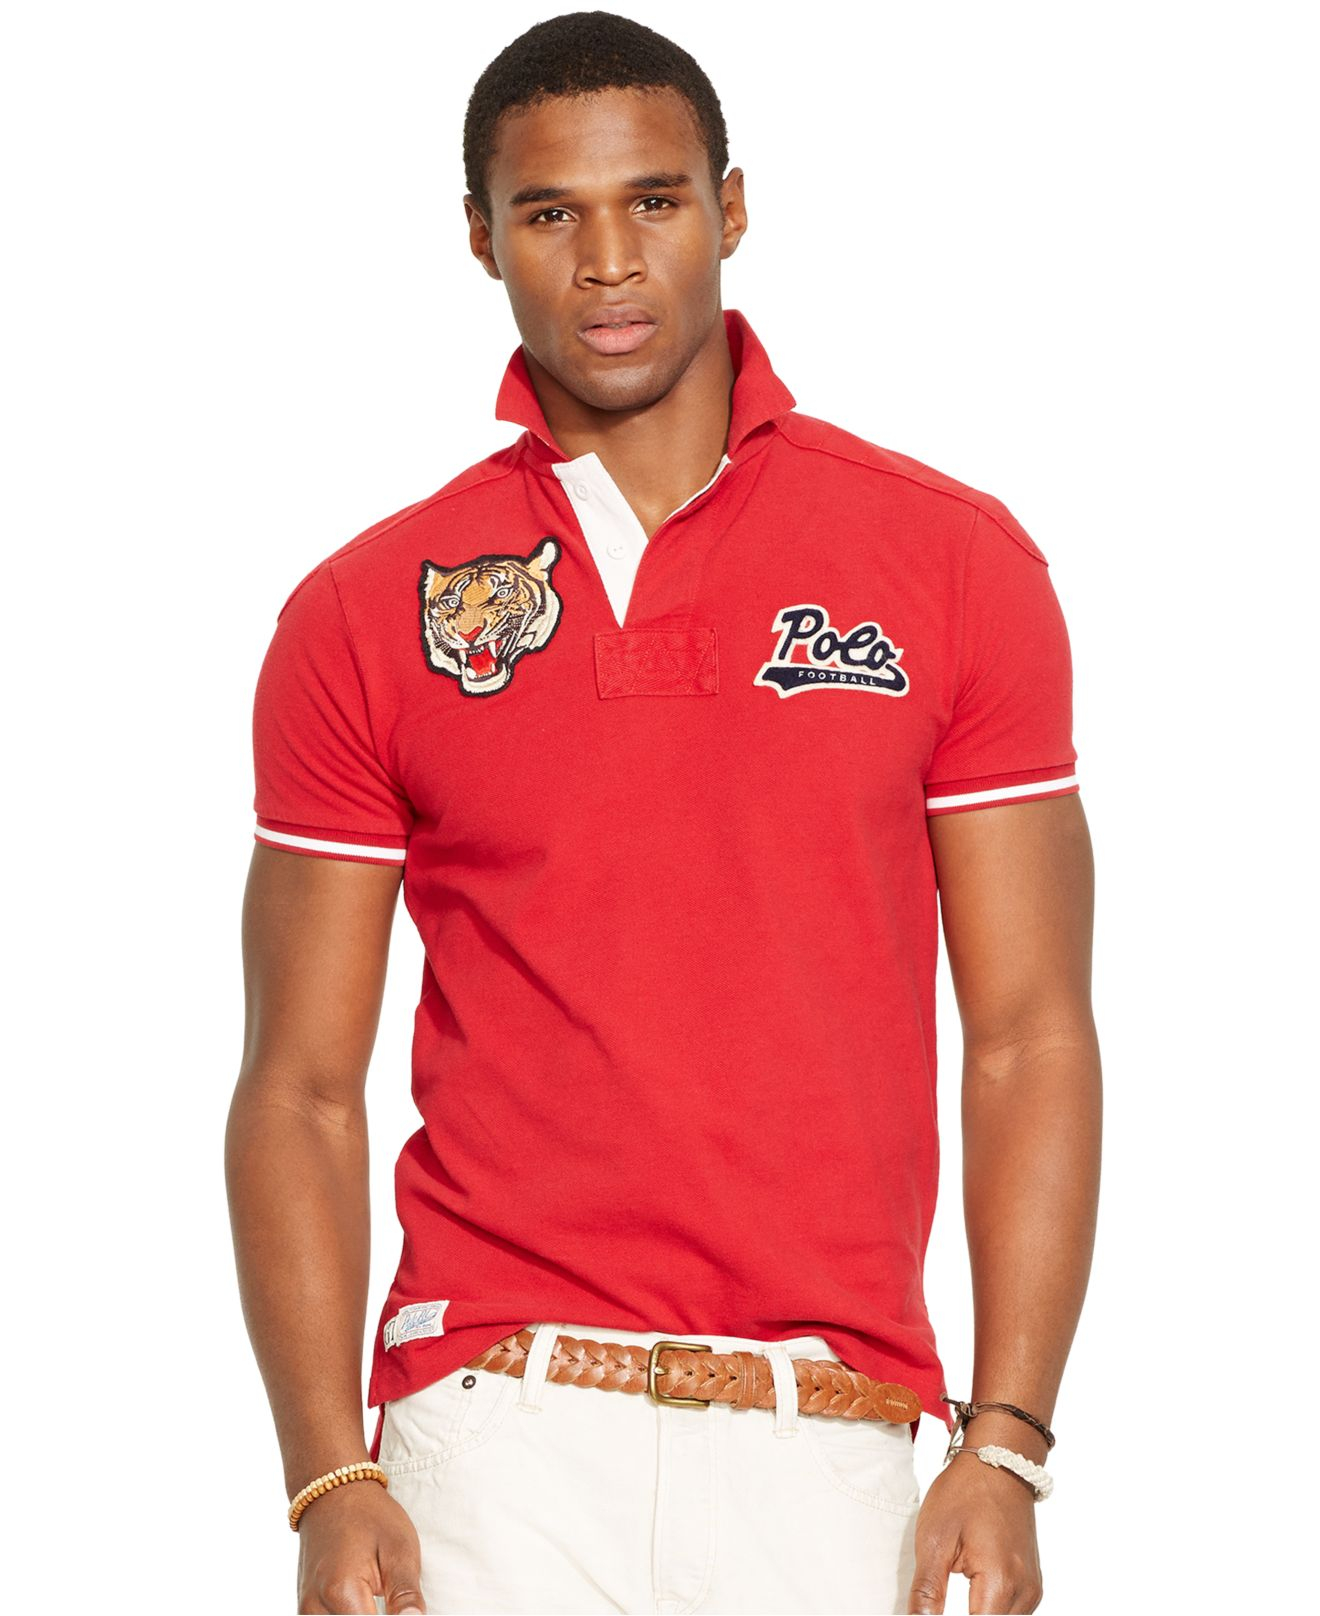 Bel camp polo discount 95% Red S MEN FASHION Shirts & T-shirts Custom fit 